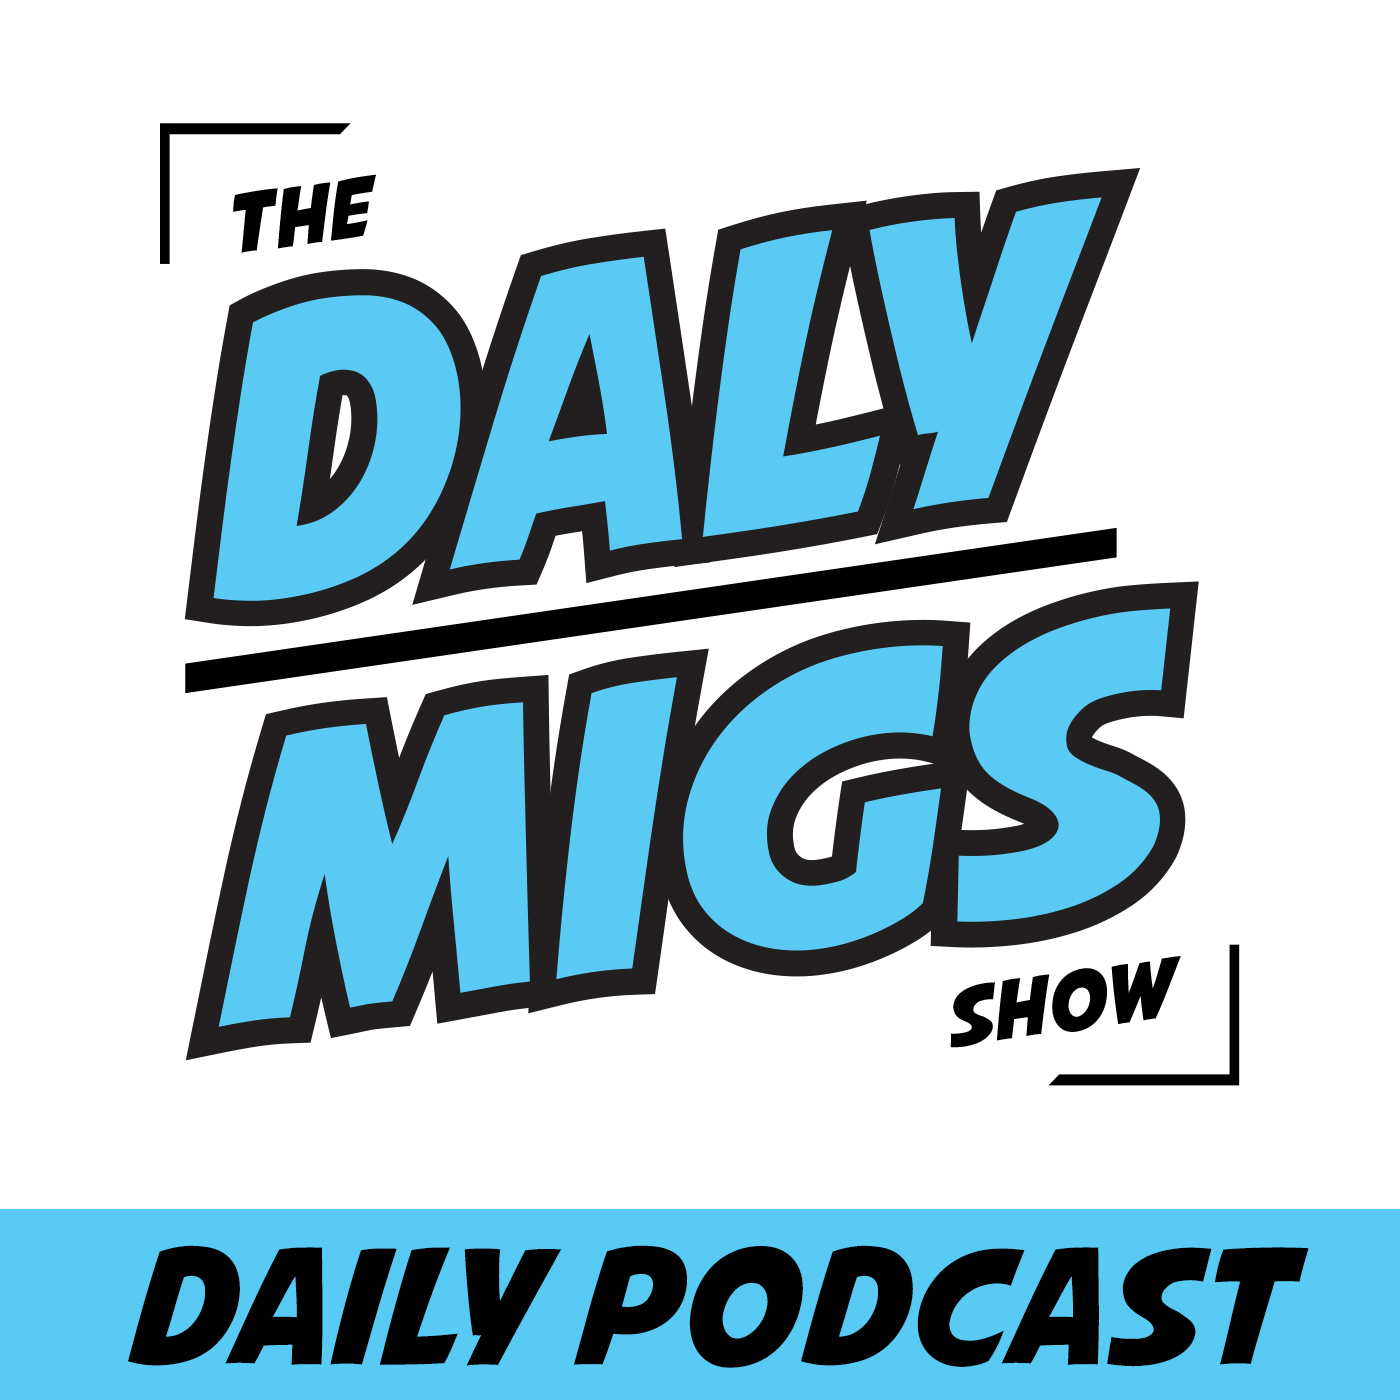 Daily Podcast pt. 4 - "Tractor kid loves tractors!"